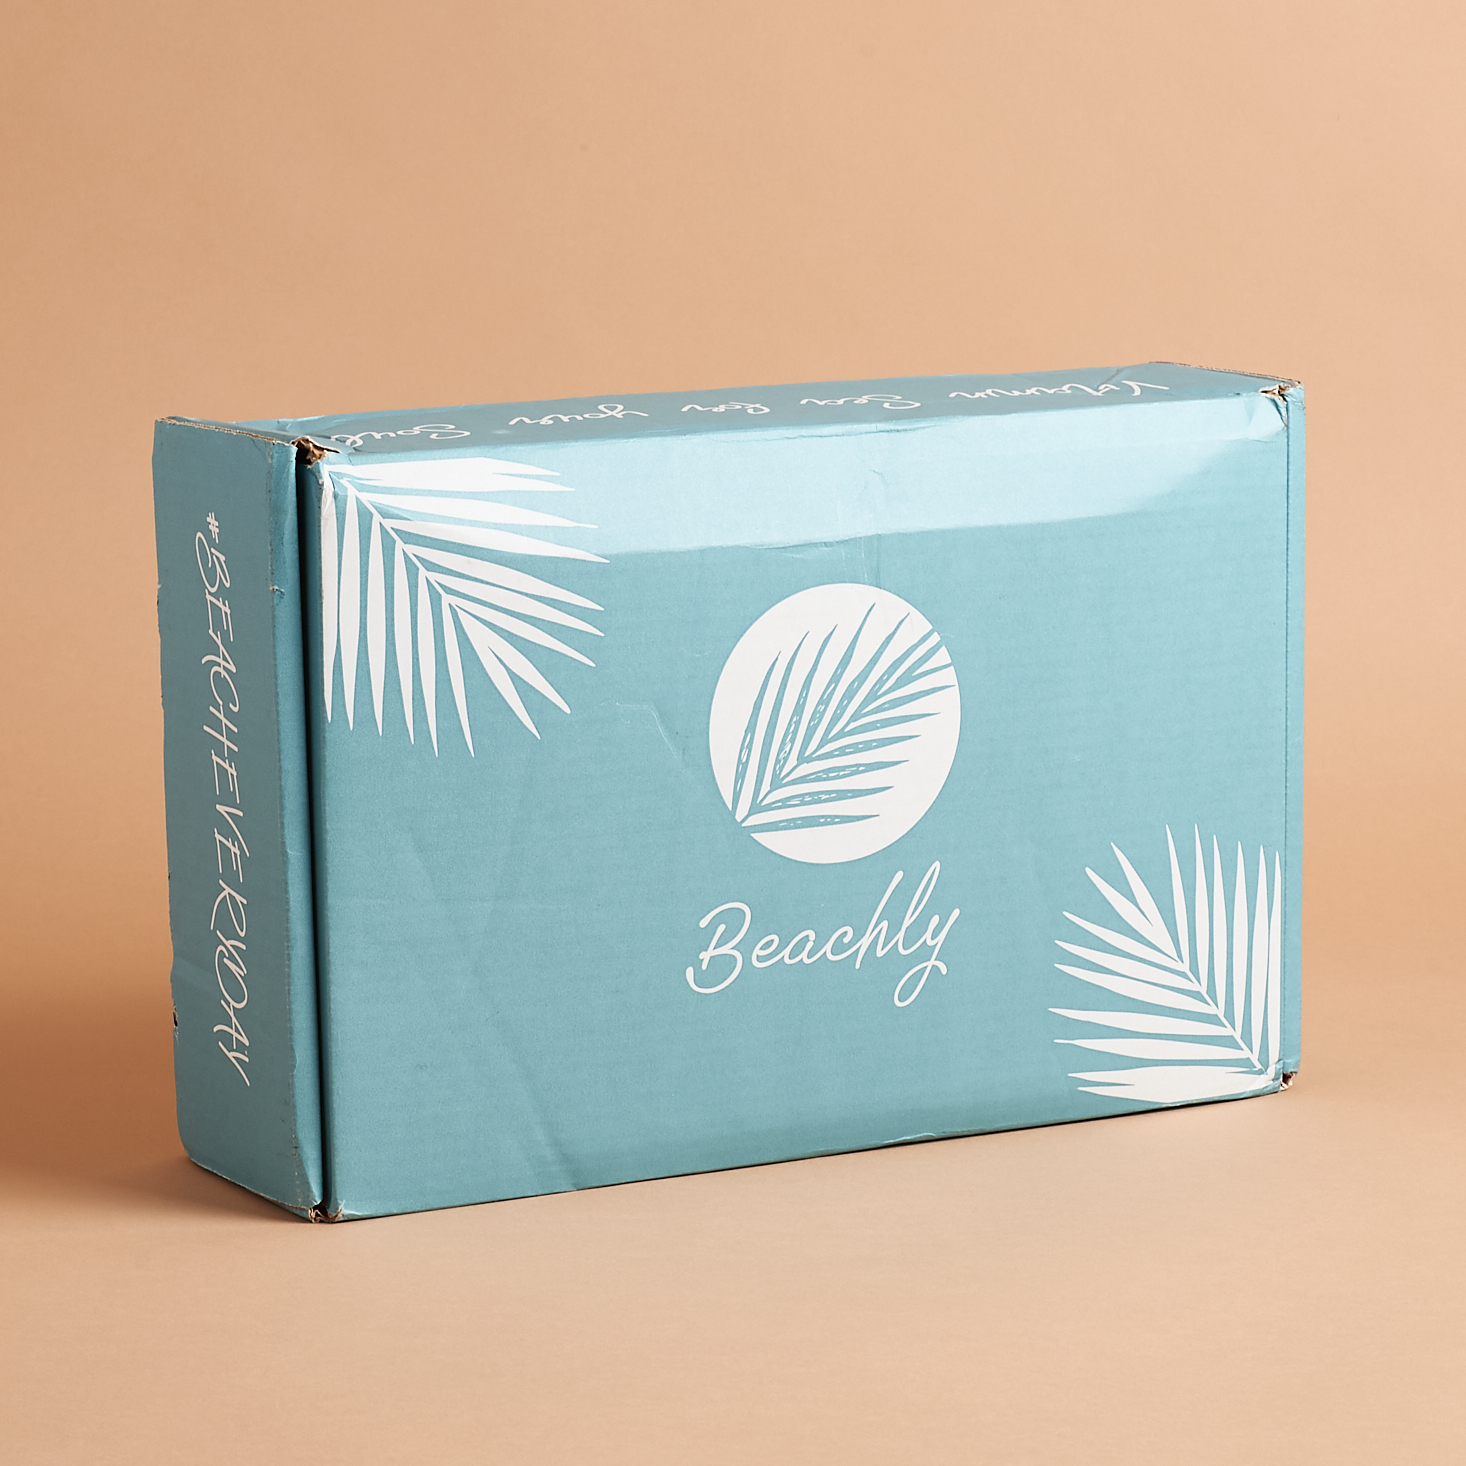 Beachly Lifestyle Box Review + Coupon – Fall 2020